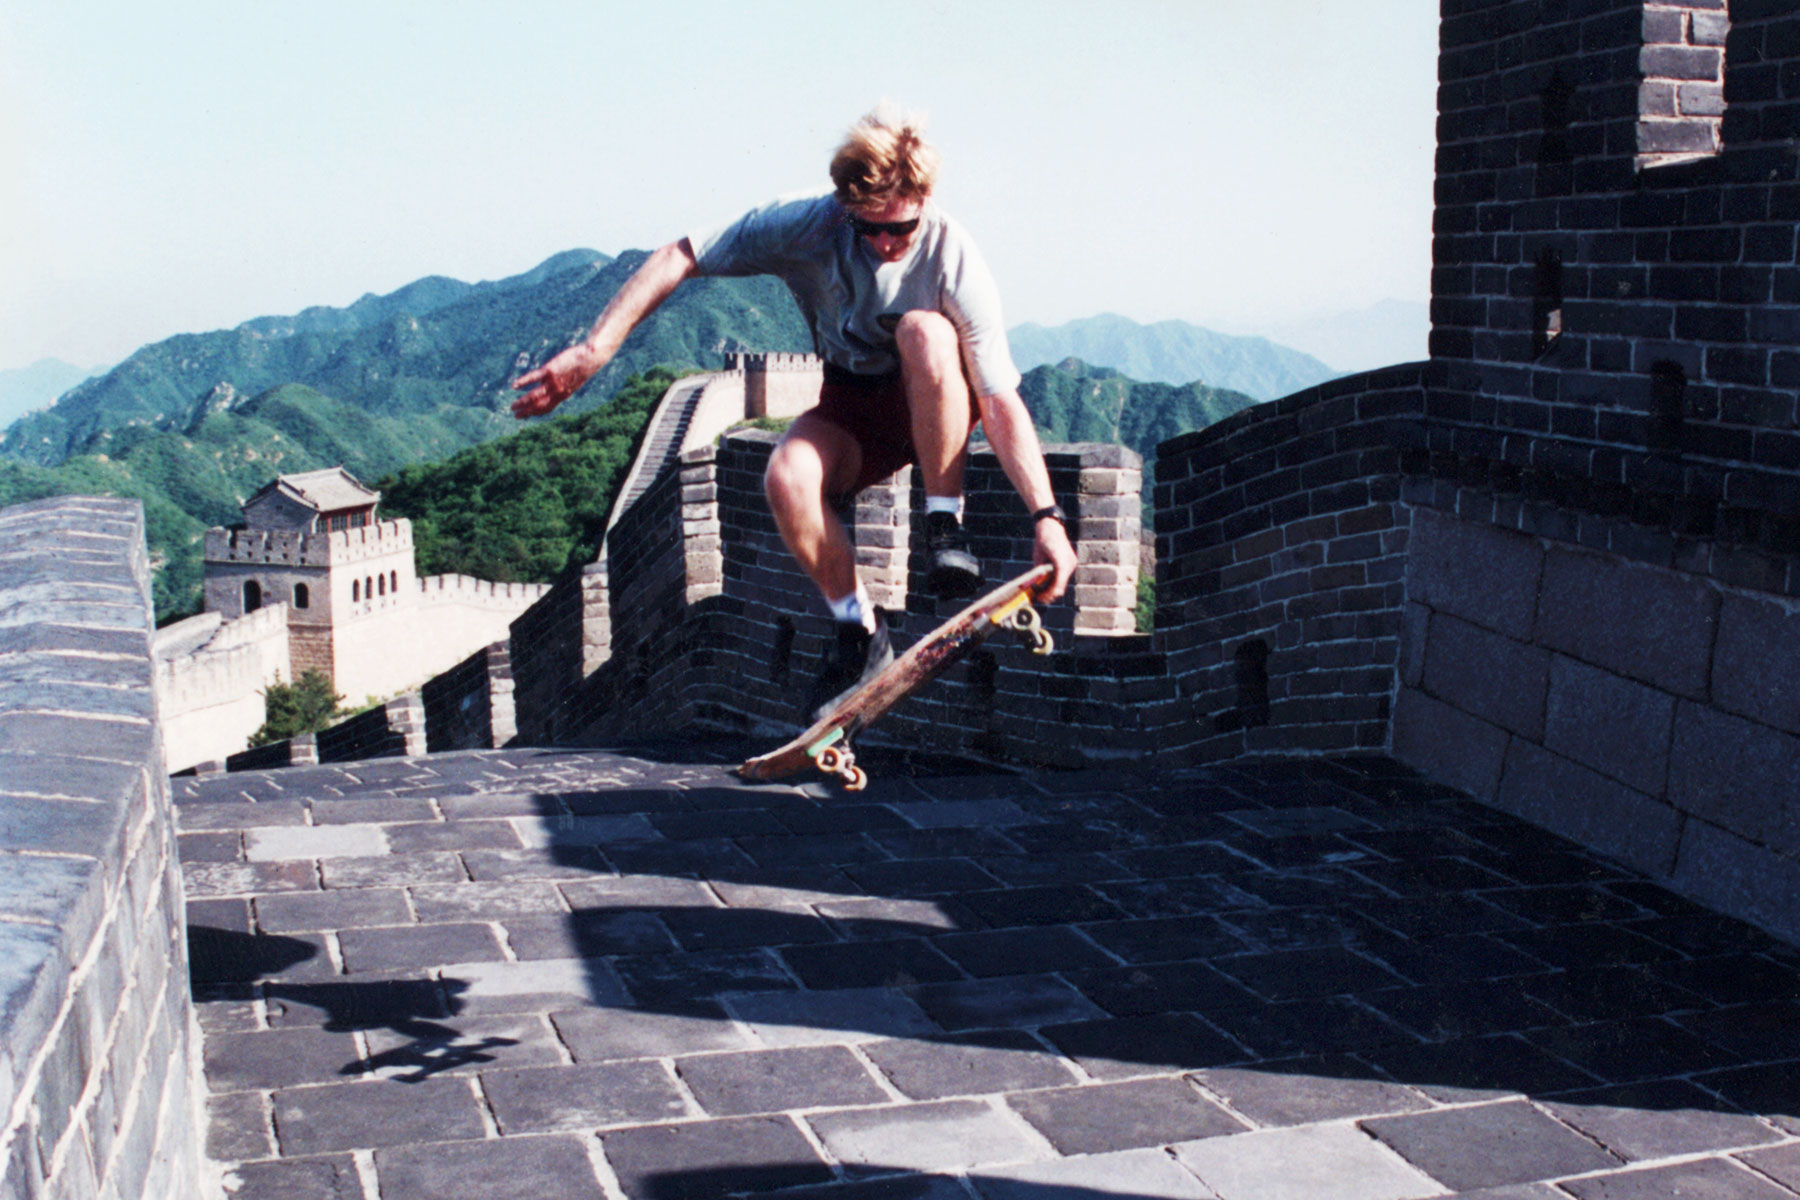 Skateboarding on the Great Wall of China | Surf Doctor Steven Andrew Martin | Skate the Wall | Badaling Great Wall 八达岭 万里长城